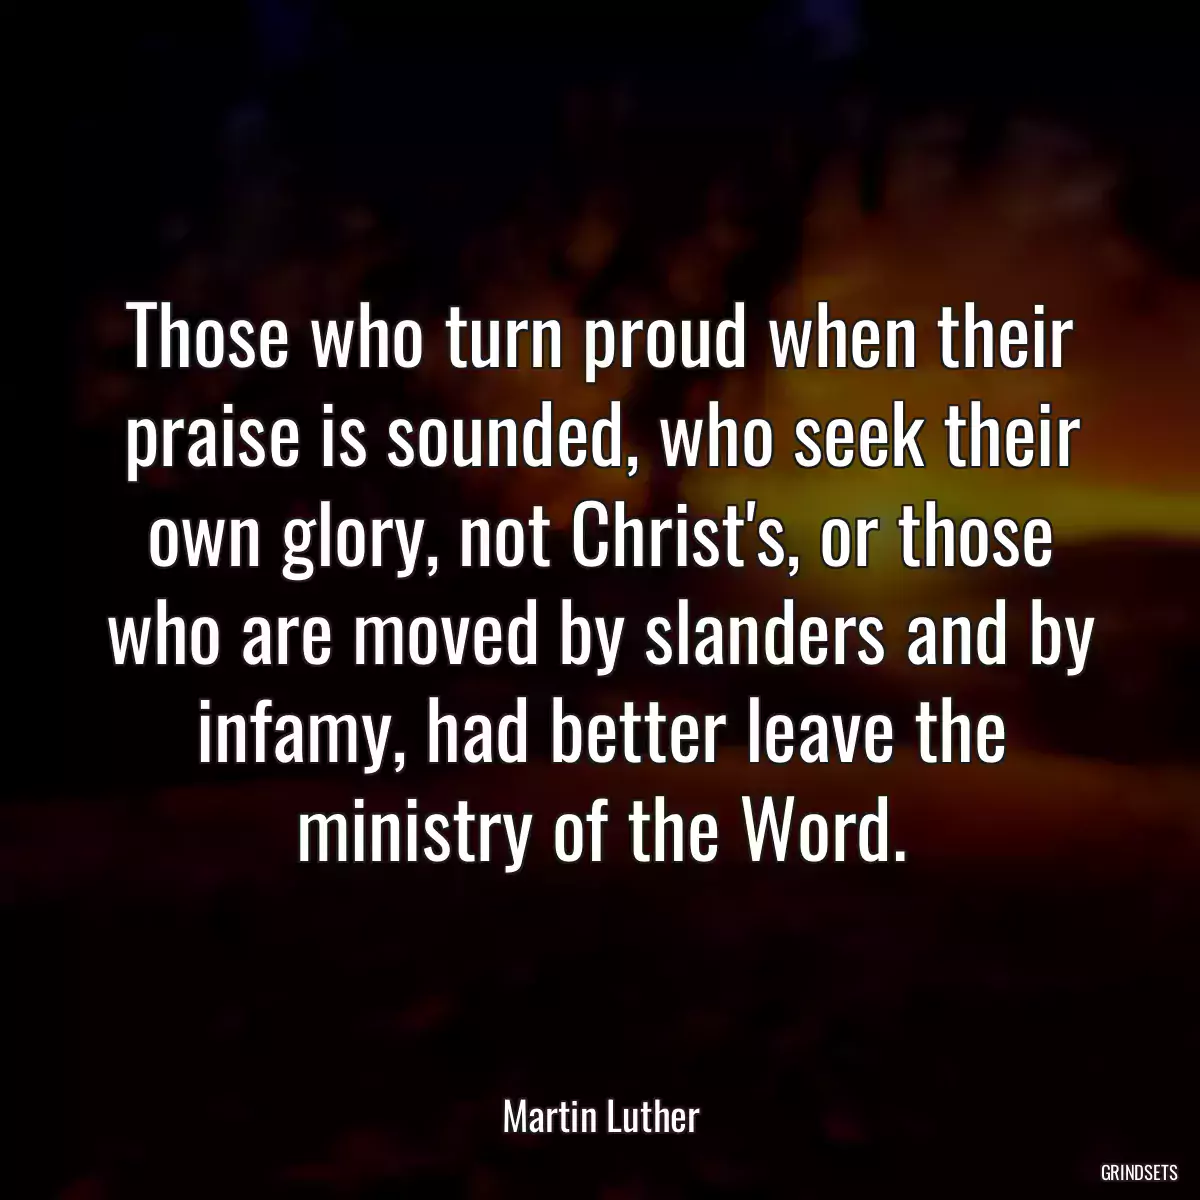 Those who turn proud when their praise is sounded, who seek their own glory, not Christ\'s, or those who are moved by slanders and by infamy, had better leave the ministry of the Word.